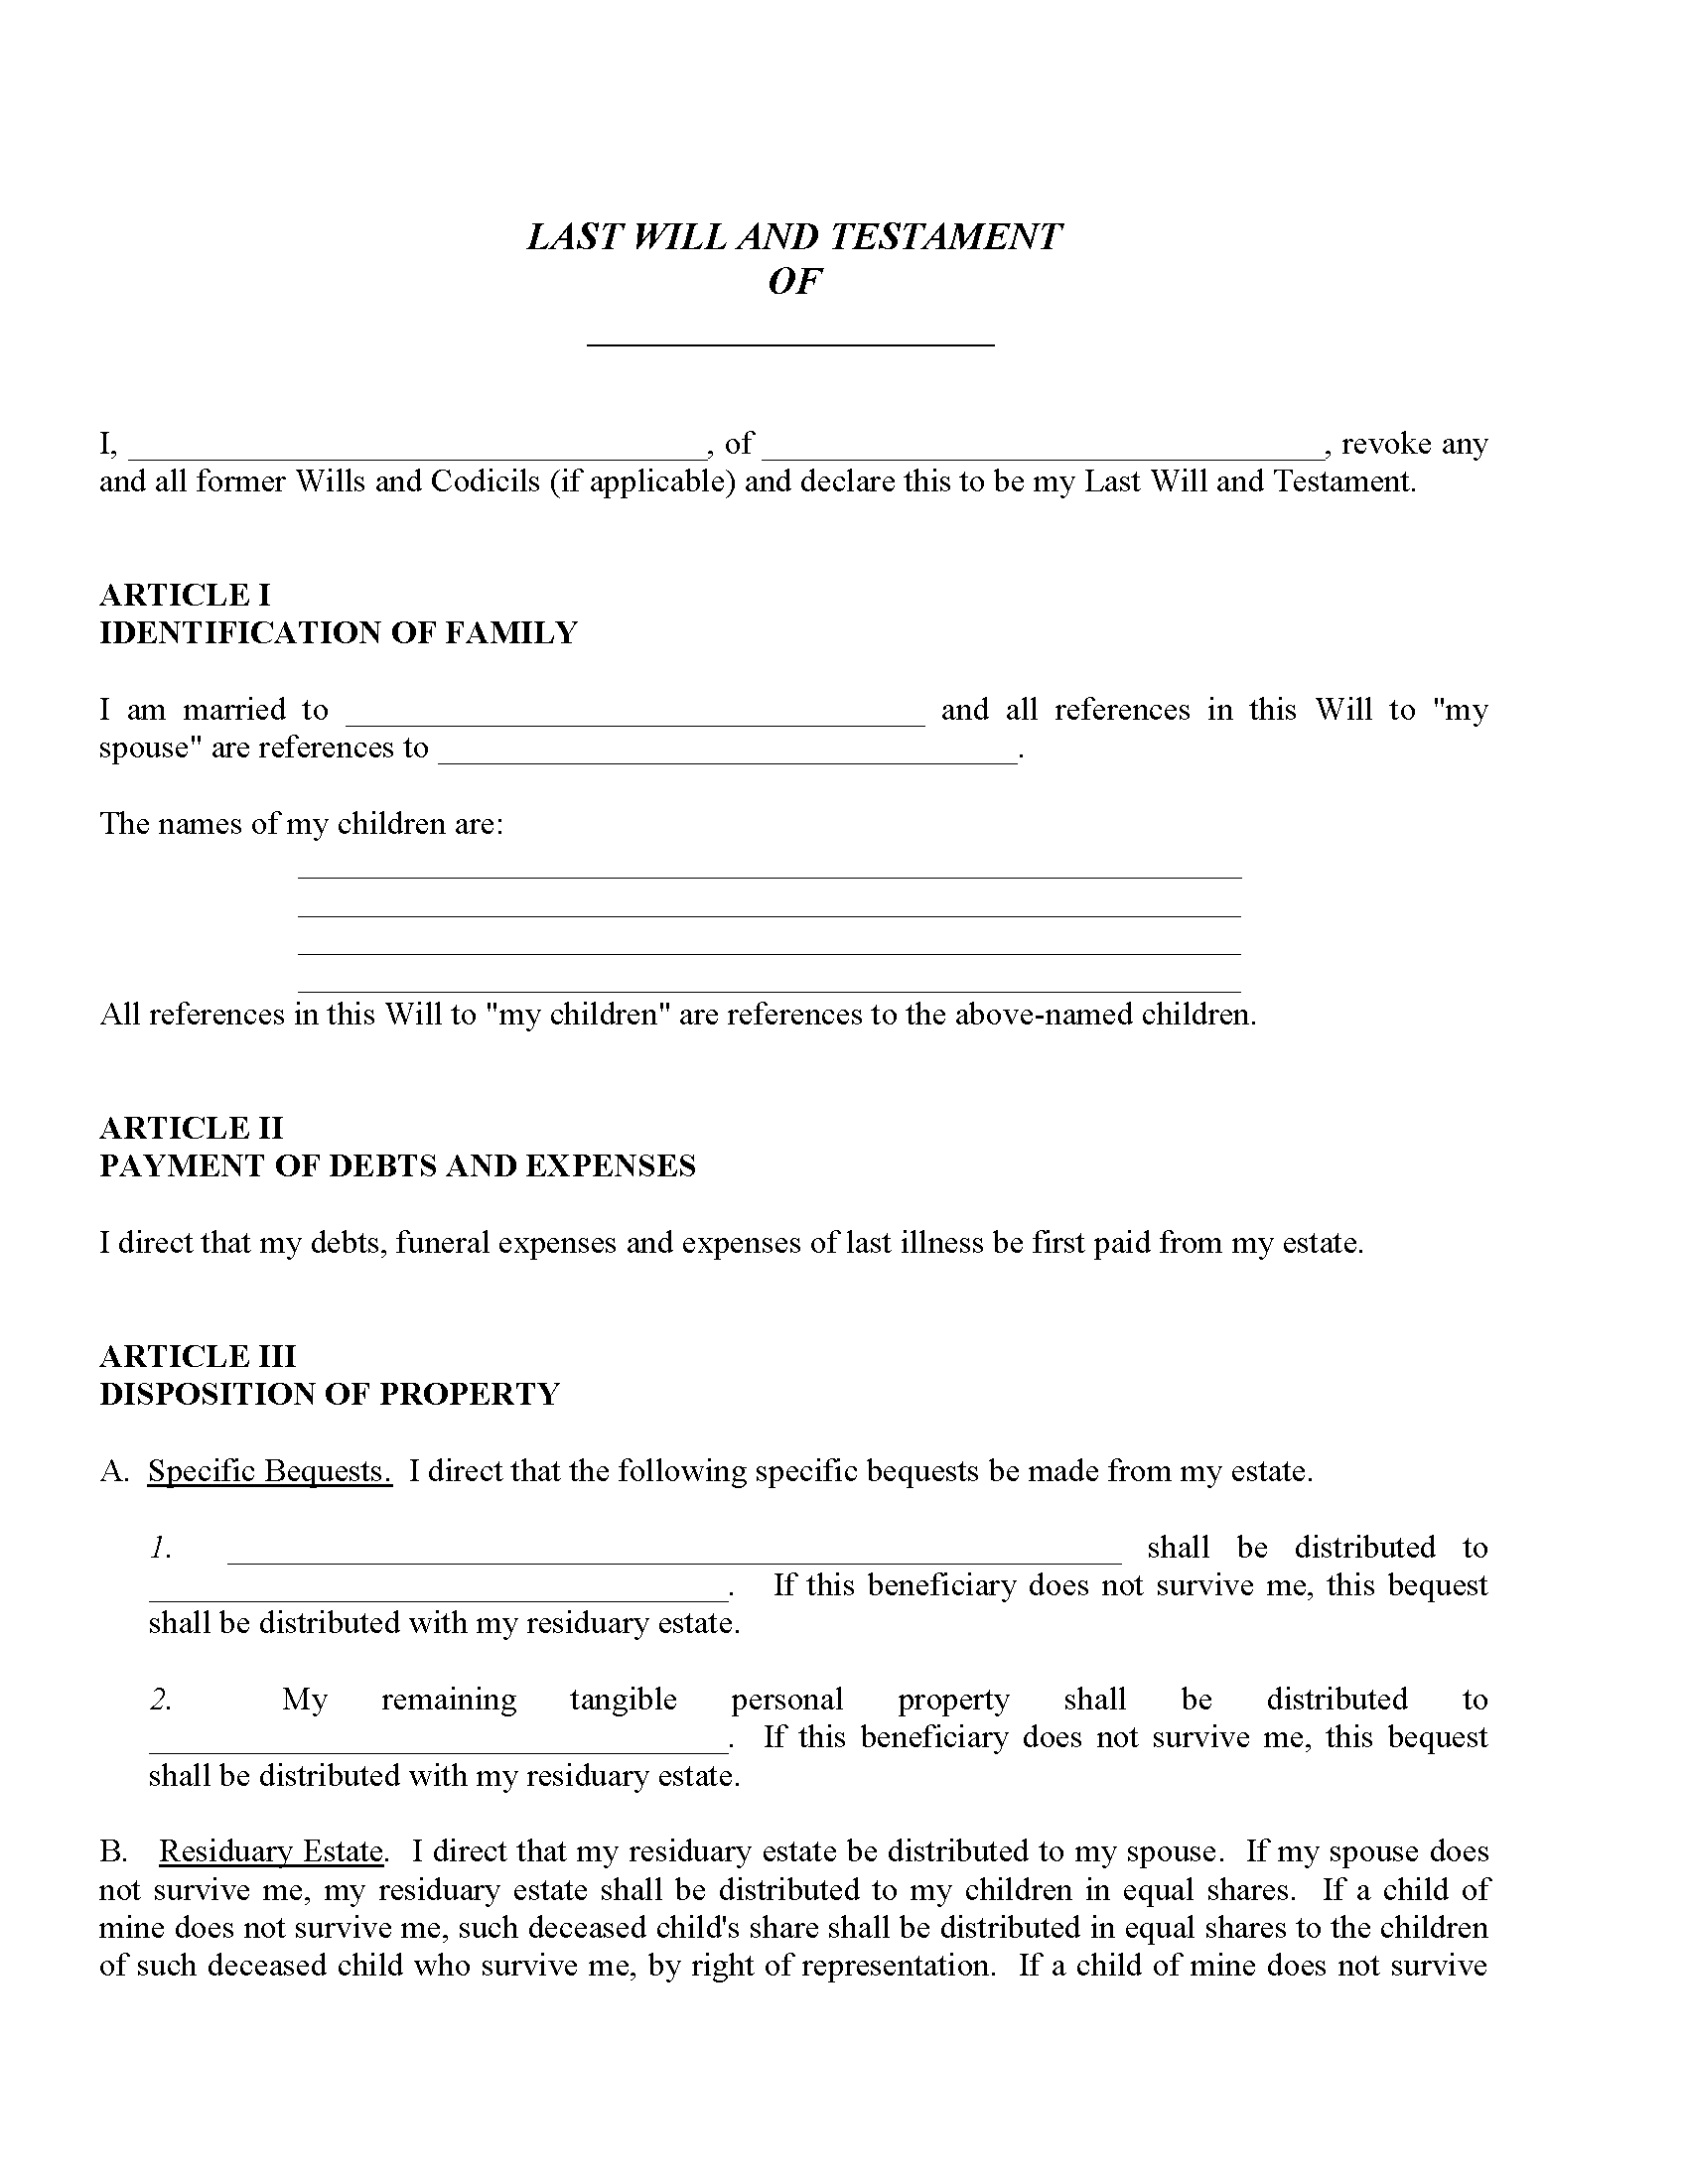 new-york-last-will-and-testament-free-printable-legal-forms